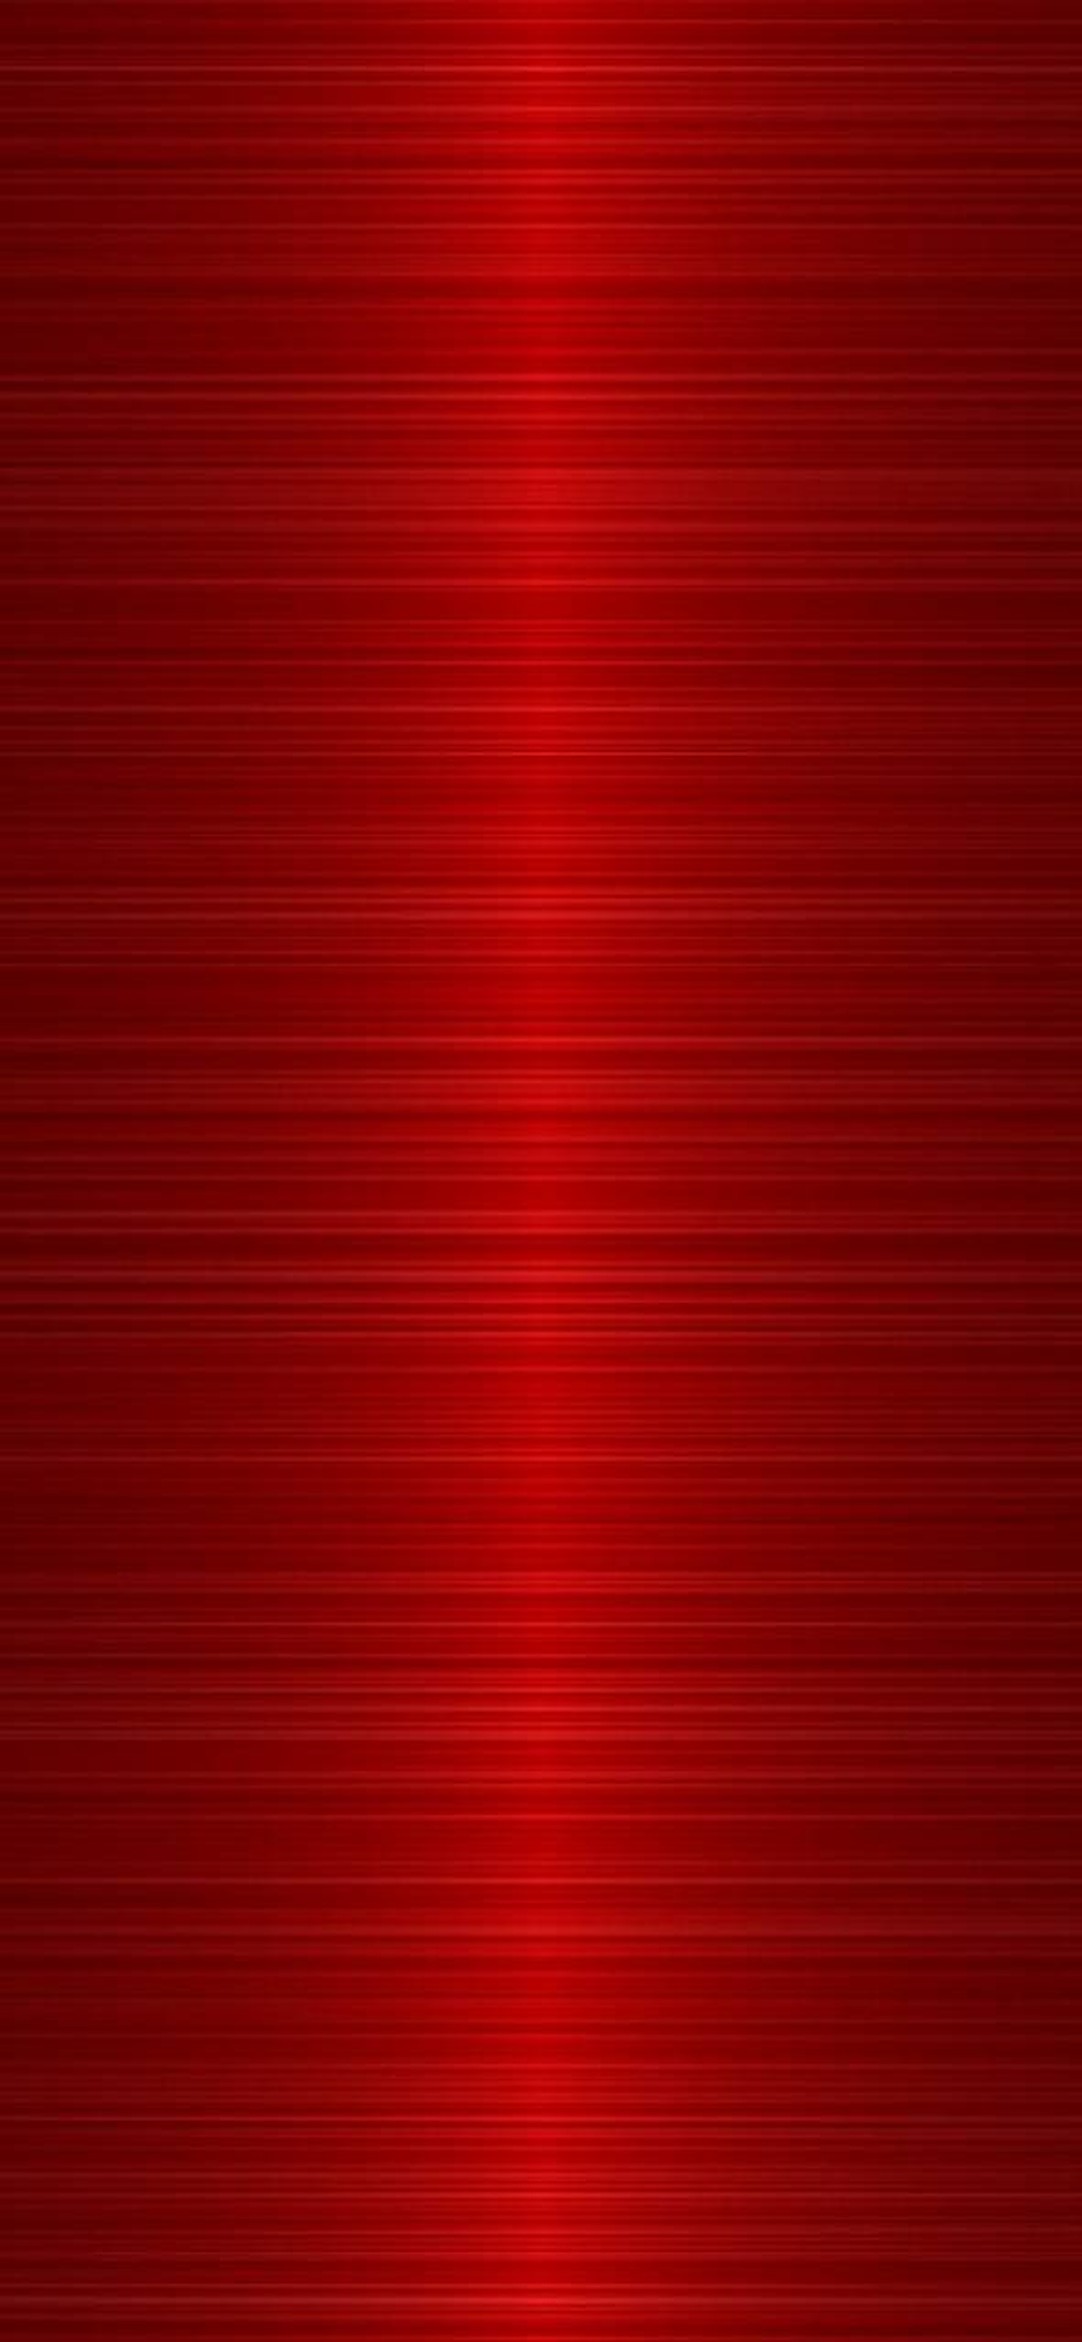 Red Background Wallpaper Hd 31